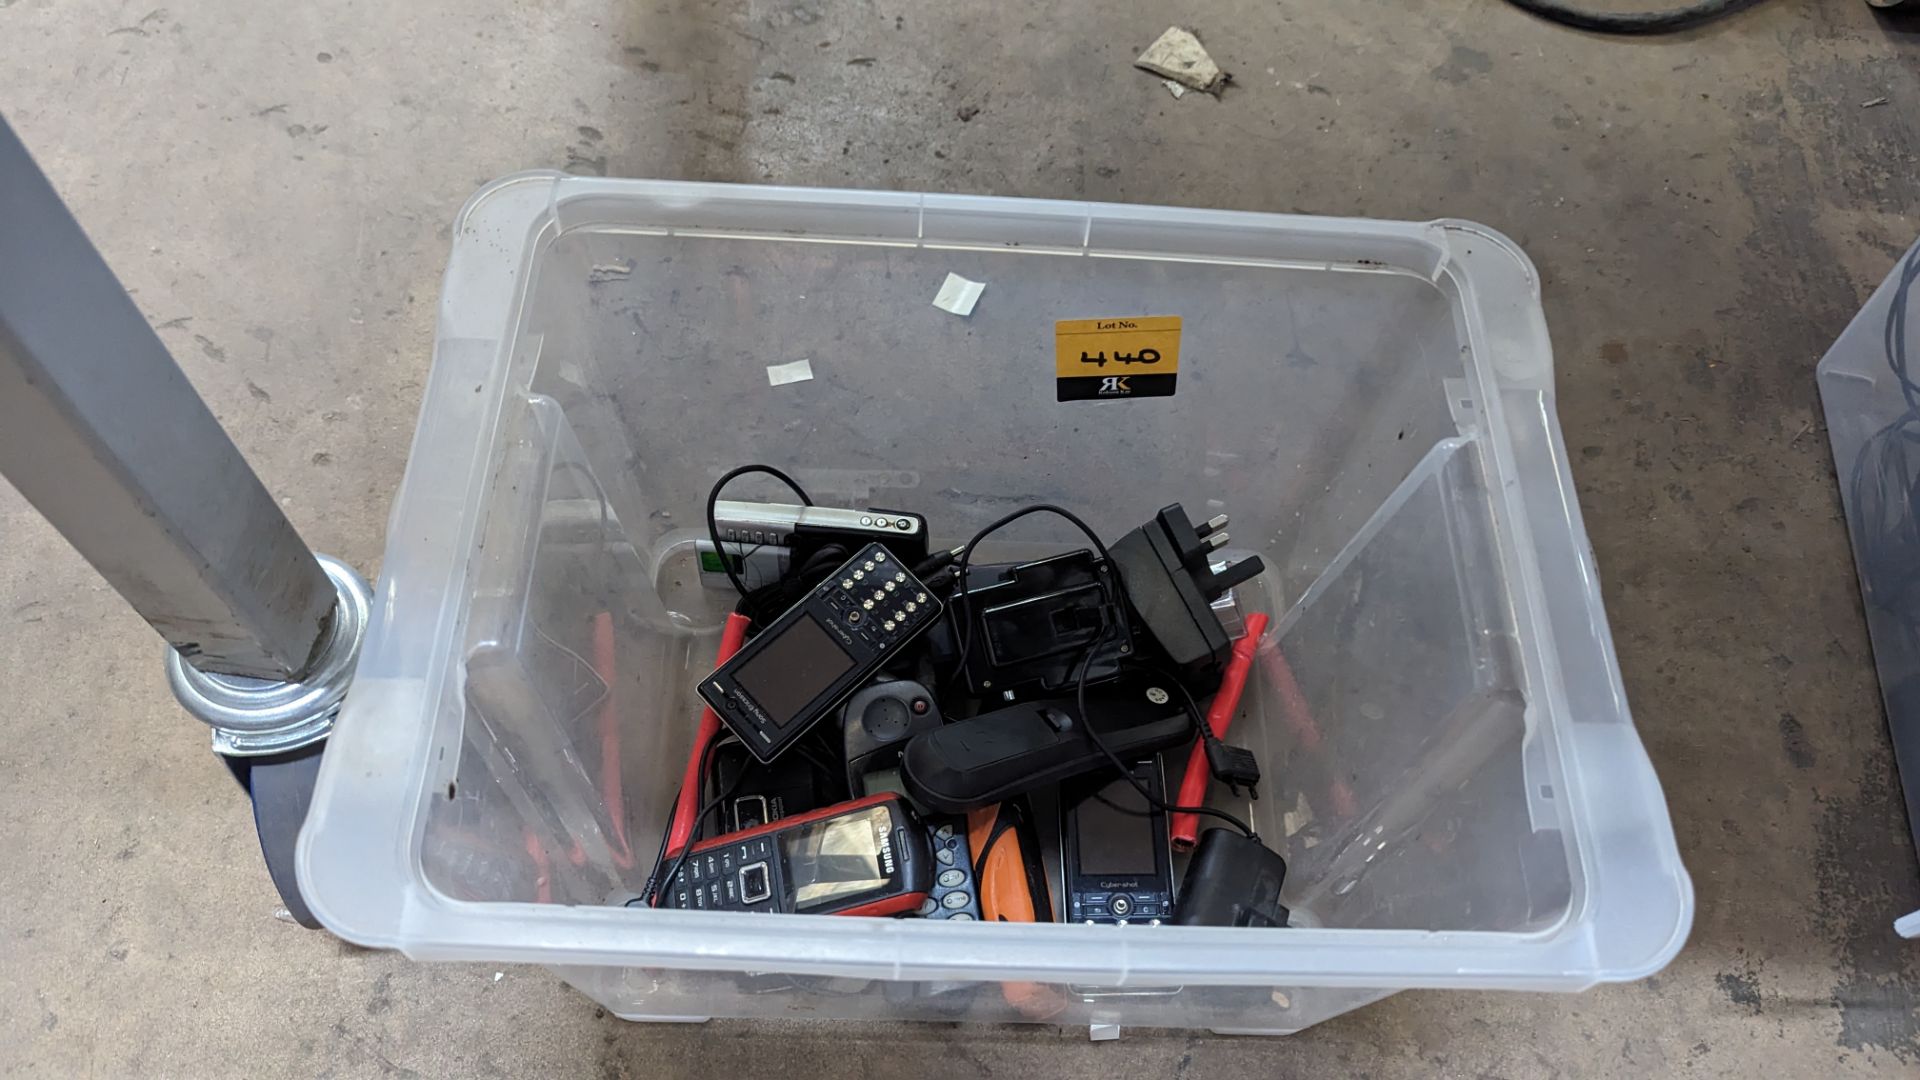 The contents of a crate of mobile phones